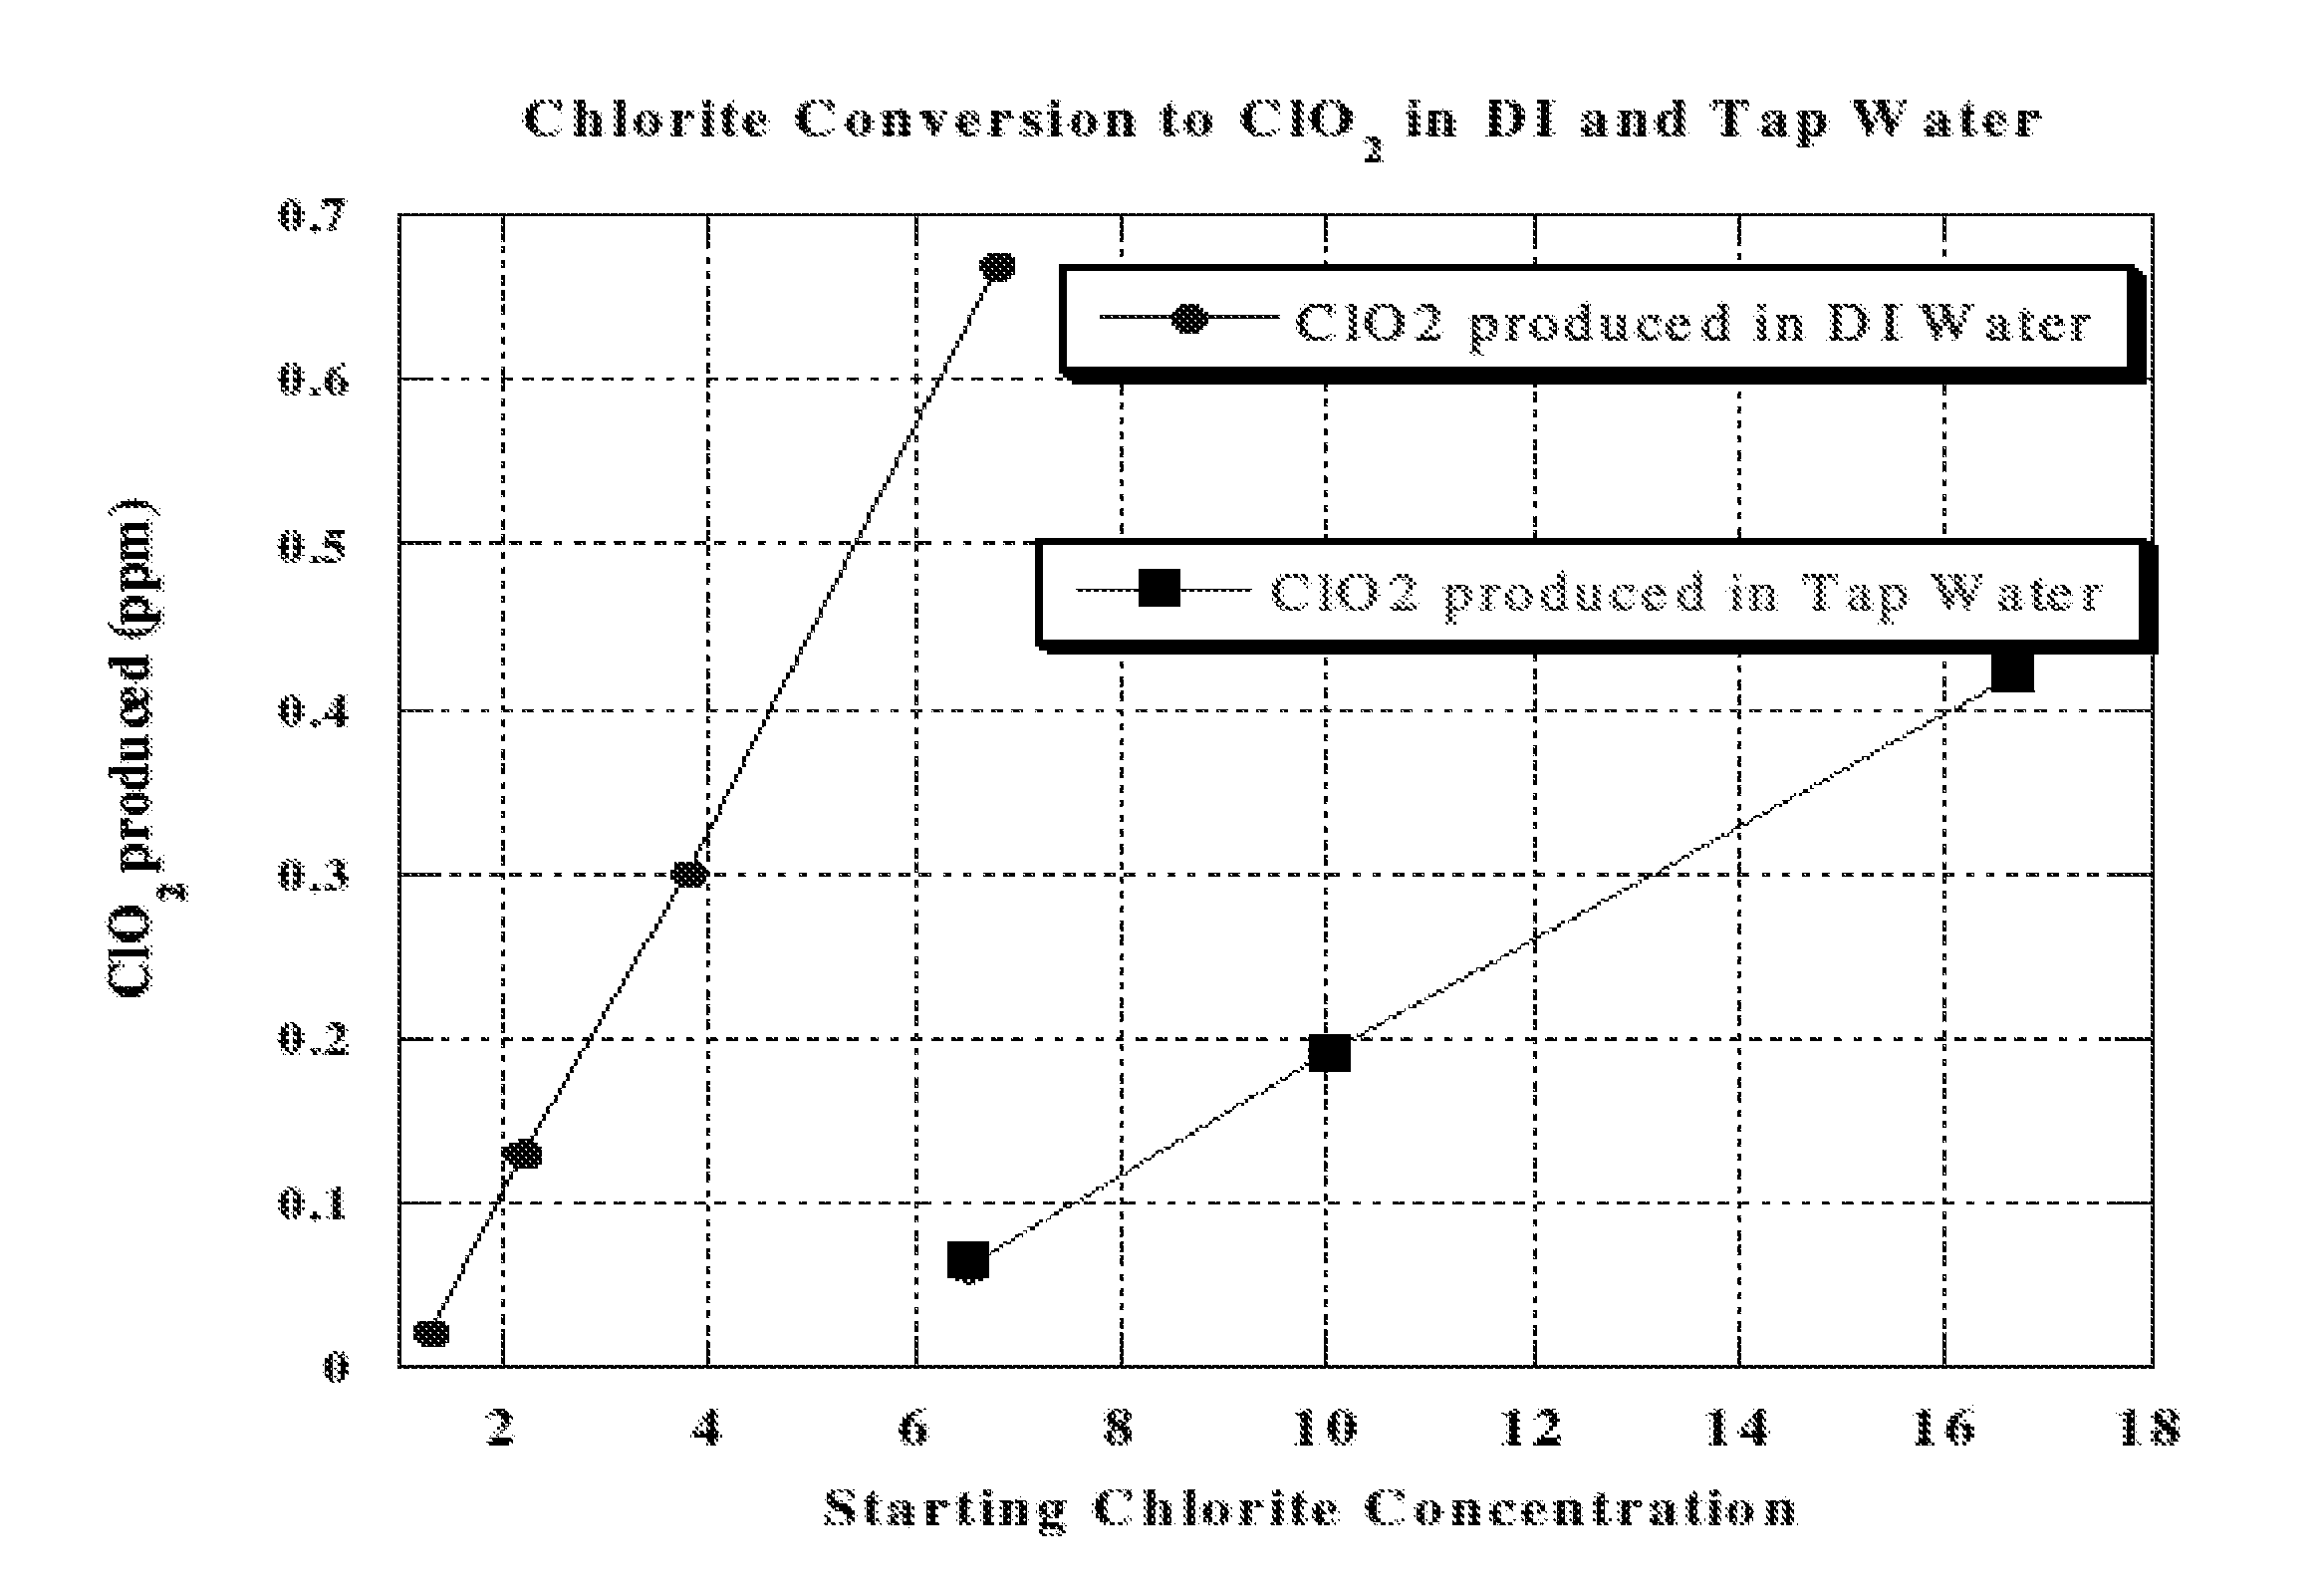 Method and apparatus for the continous production of low concentrations of chlorine dioxide from low concentrations of aqueous chlorite